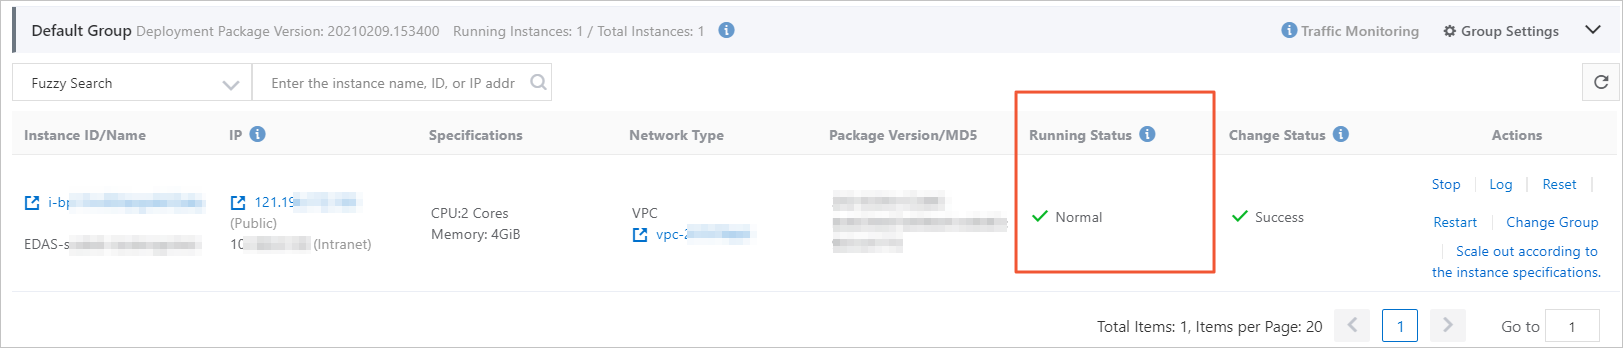 Instance deployment information - After a health check URL is configured